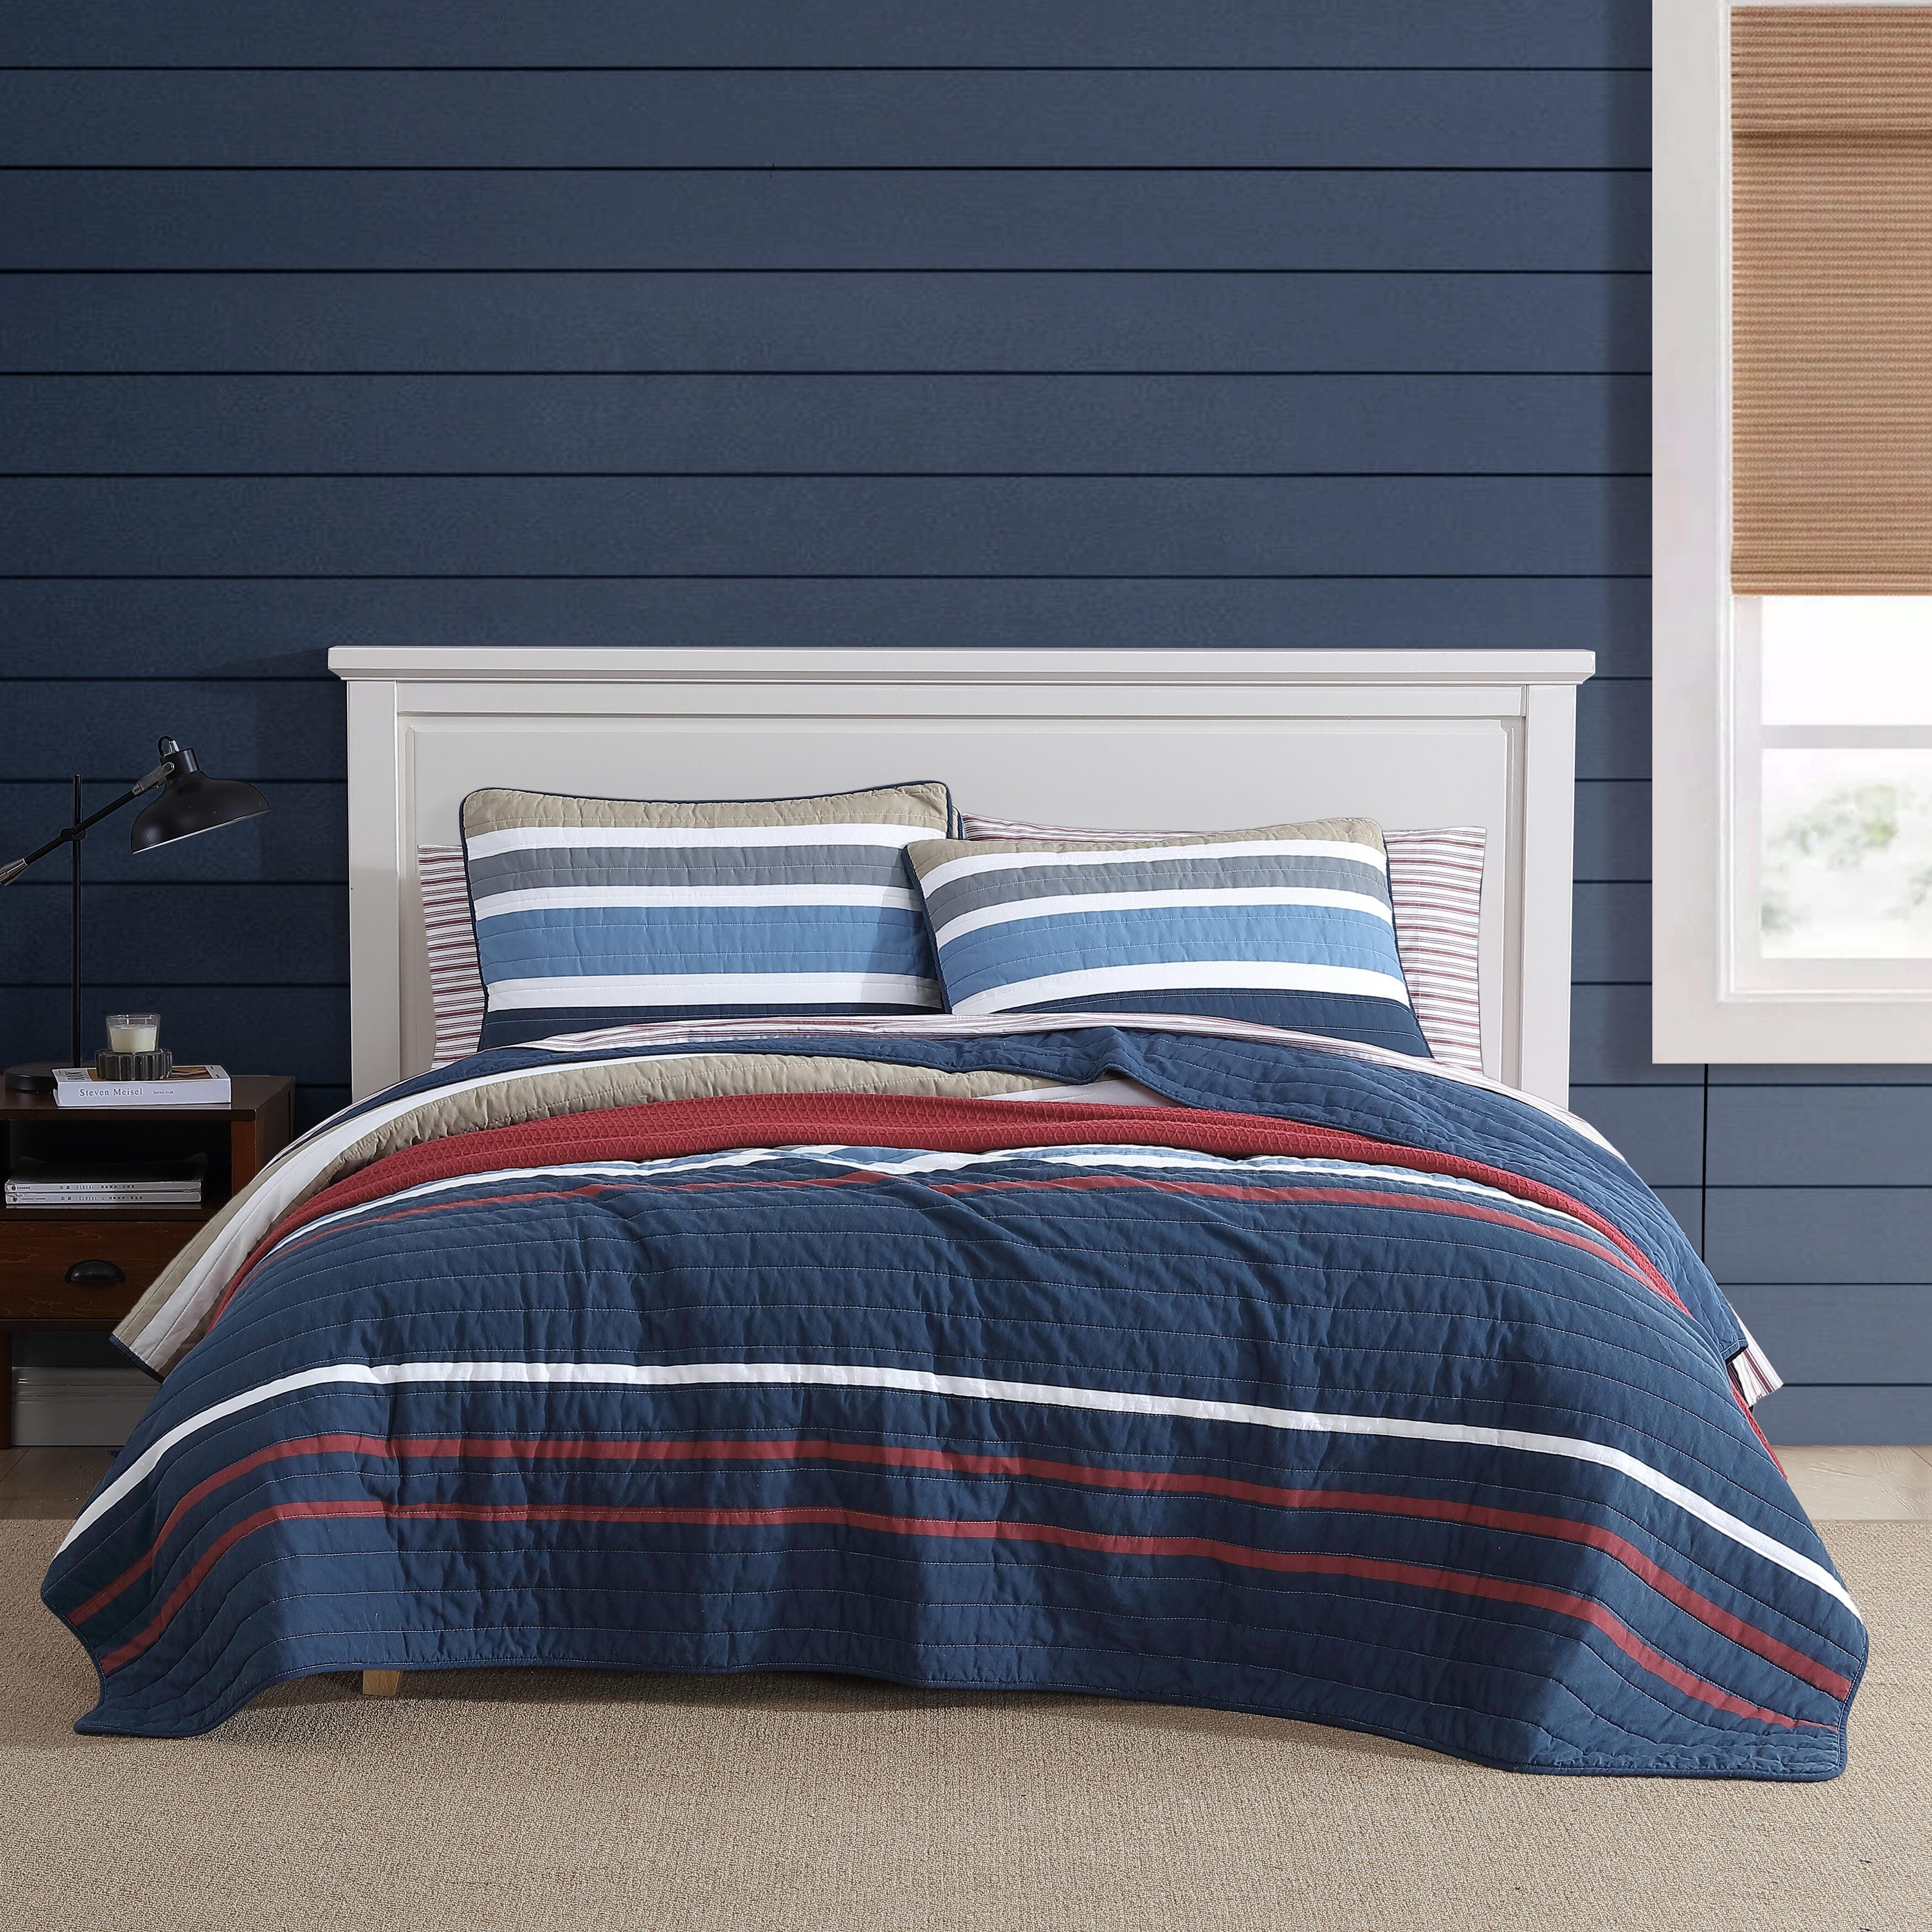 Nautica Quilts and Bedspreads - Bed Bath & Beyond